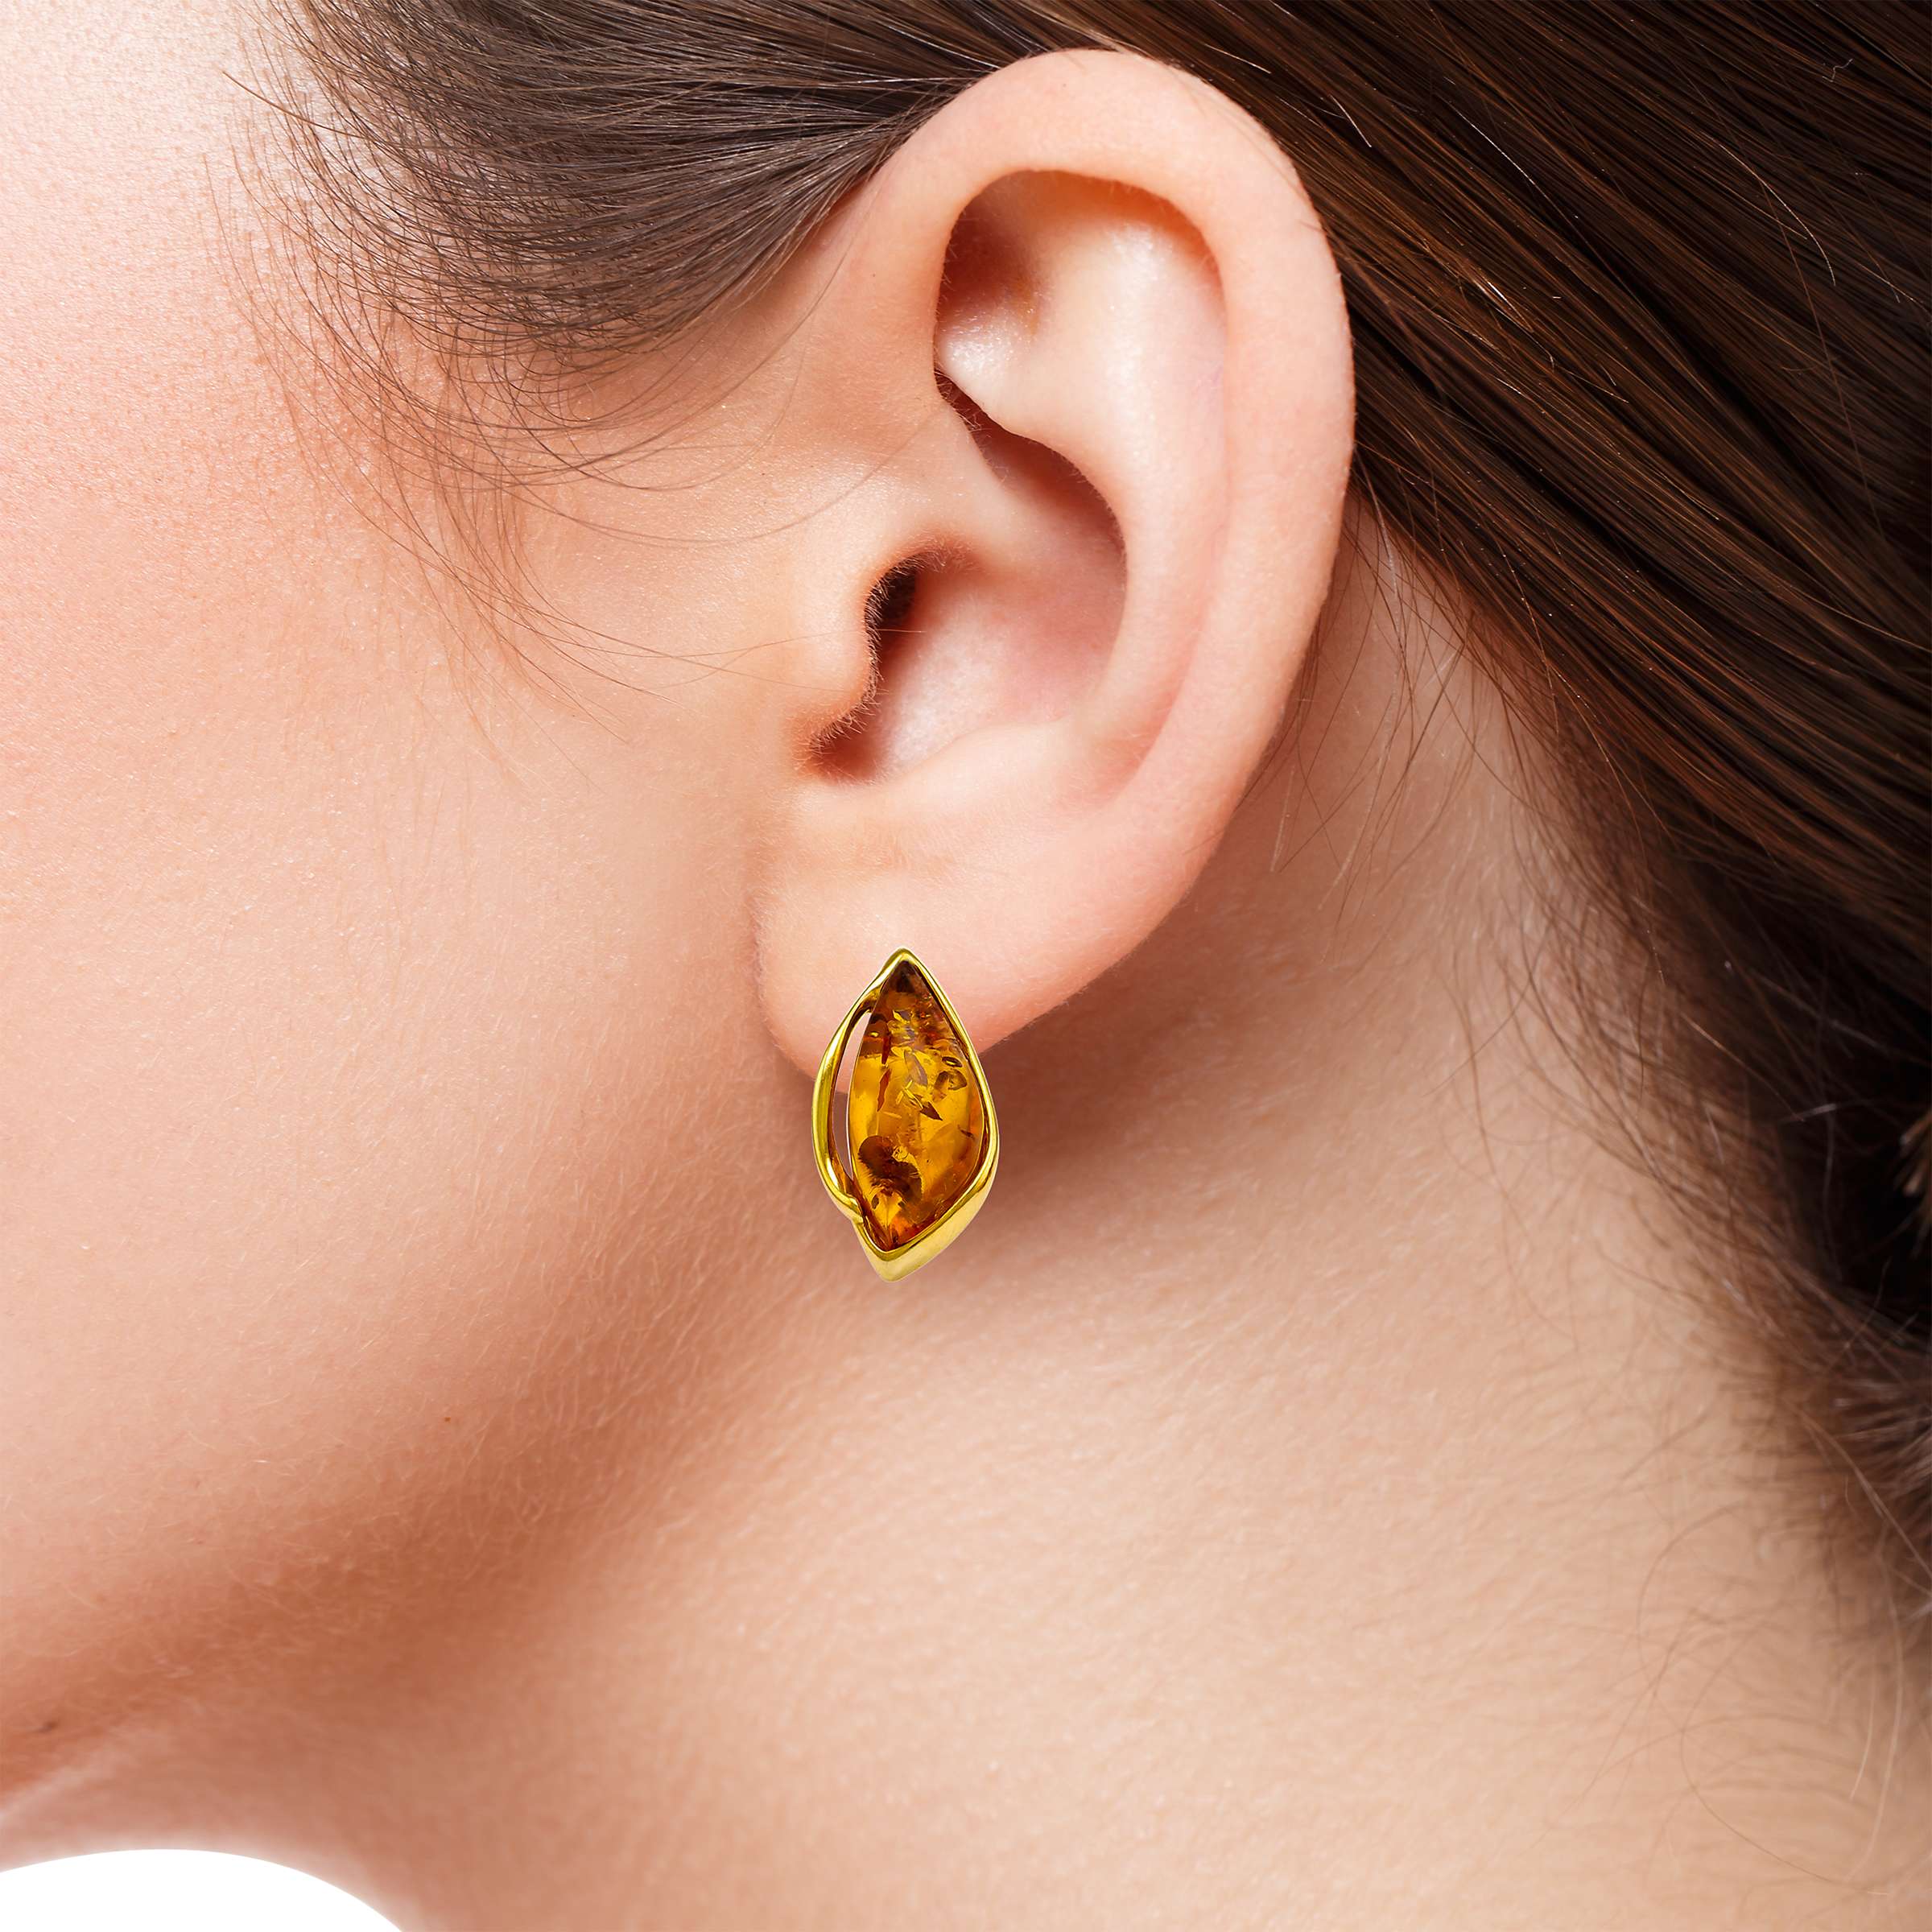 Buy Be-Jewelled Marquise Cut Amber Stud Earrings, Gold/Cognac Online at johnlewis.com